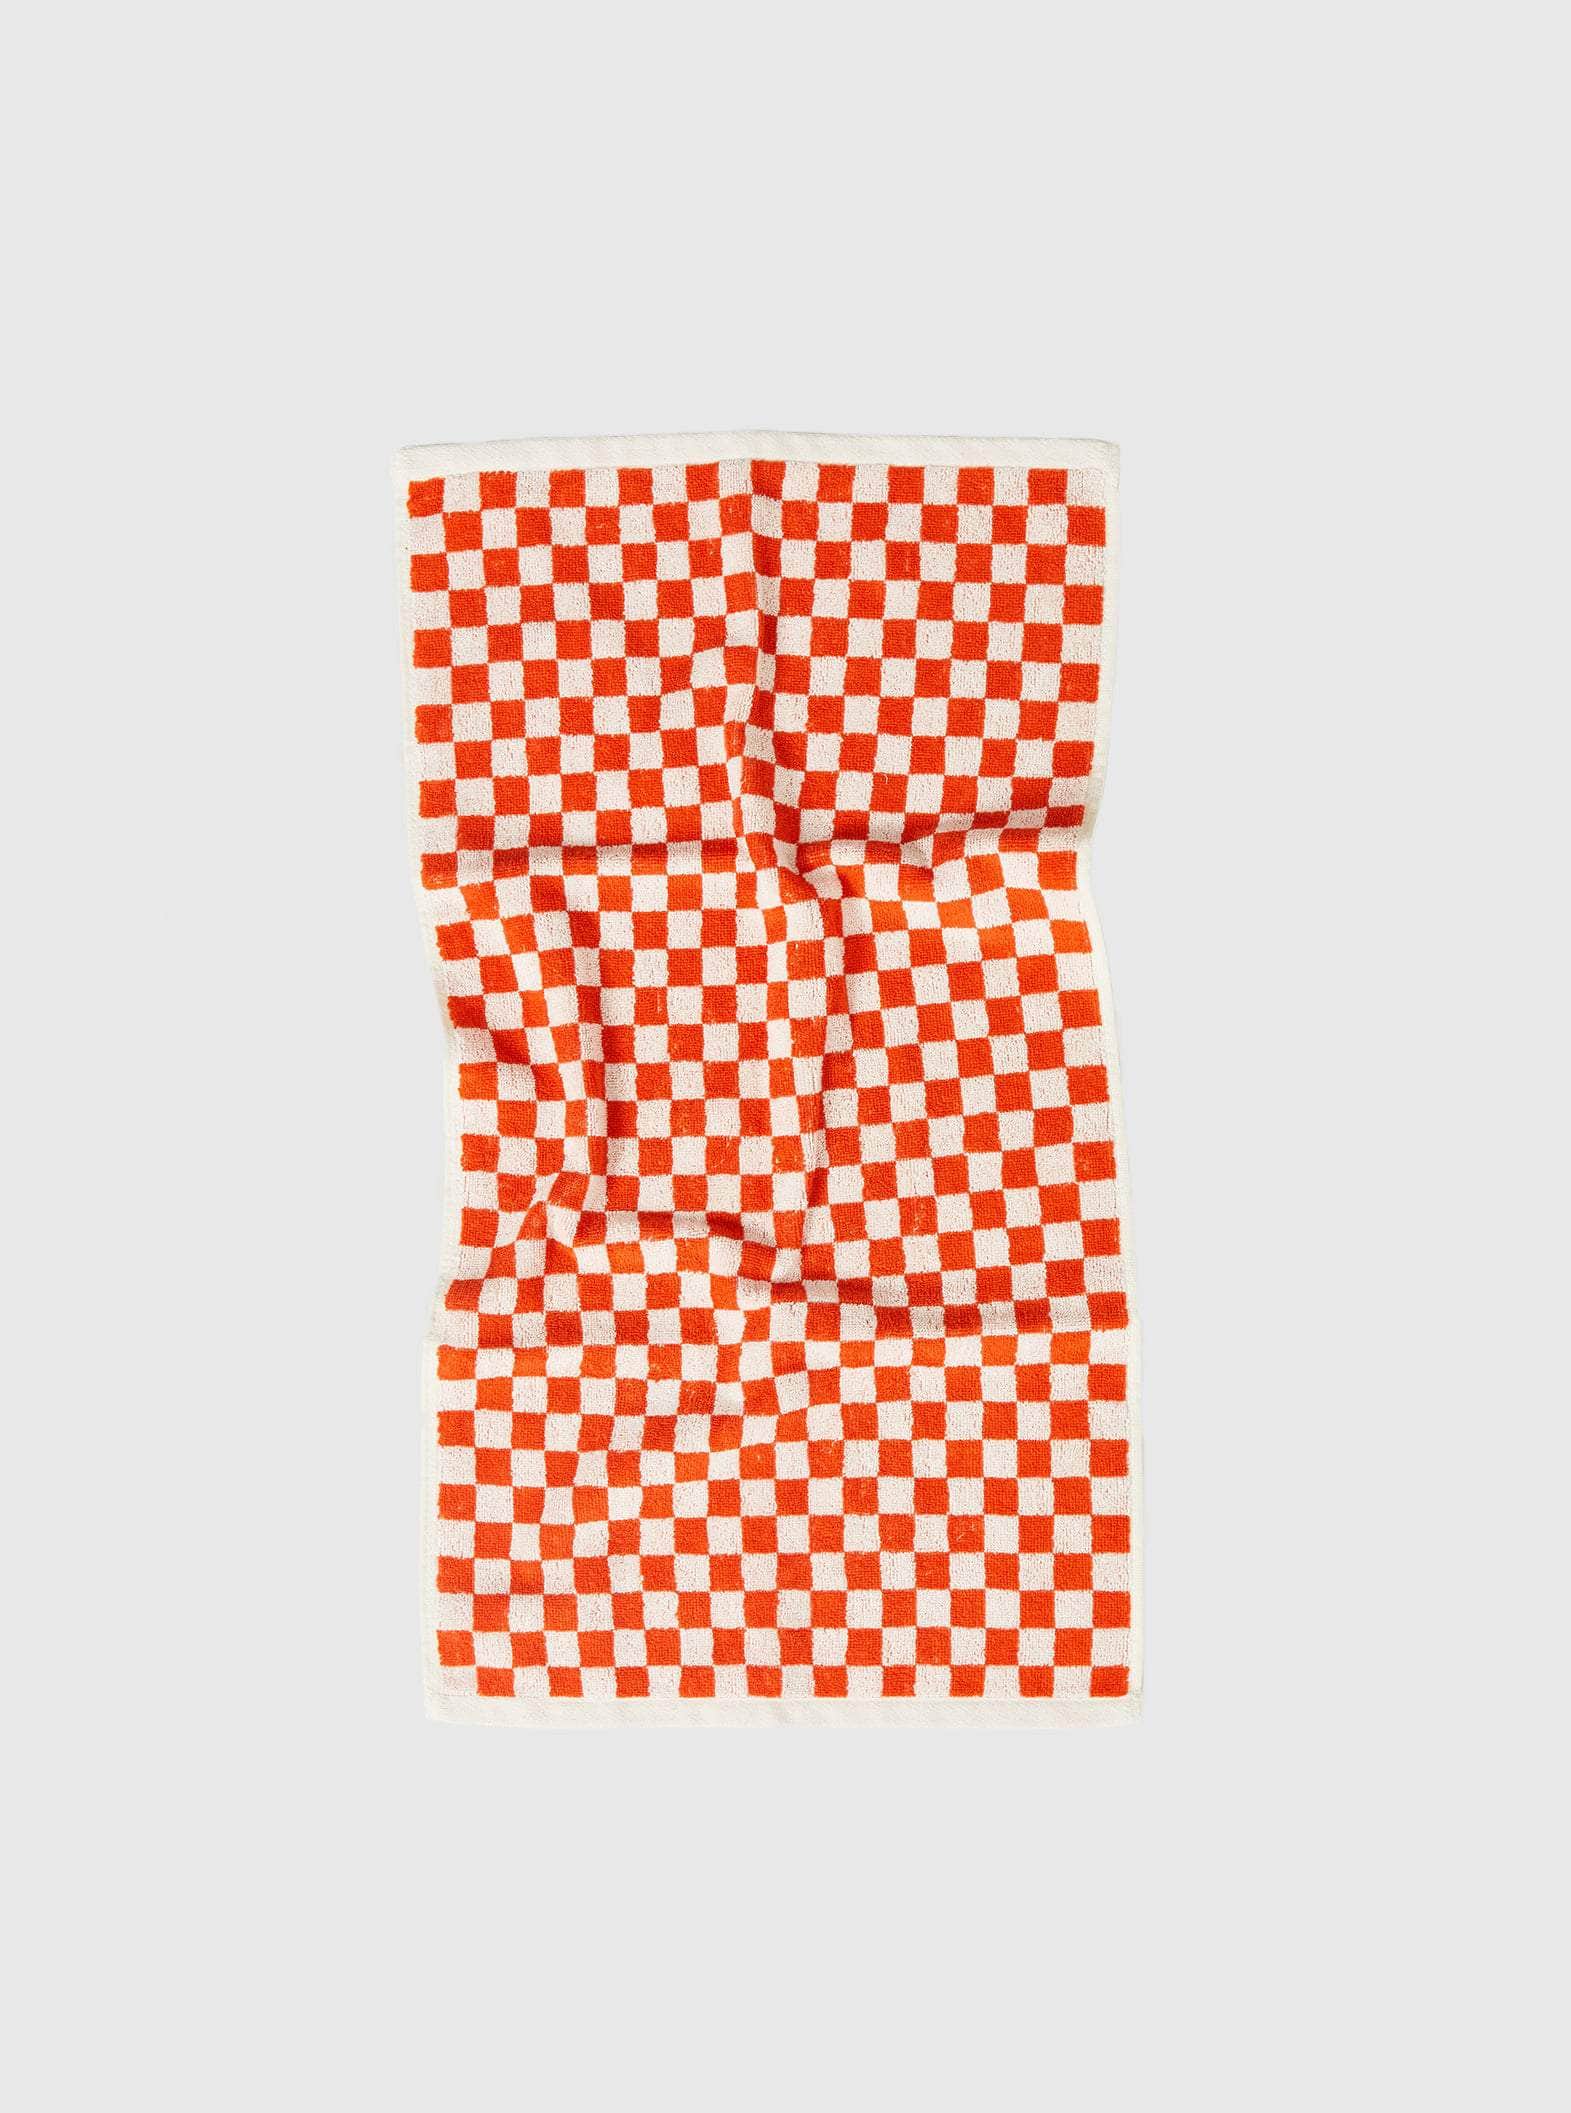 BAINA Are the Masterminds Behind the Checkered Towel Trend We’ve Been ...